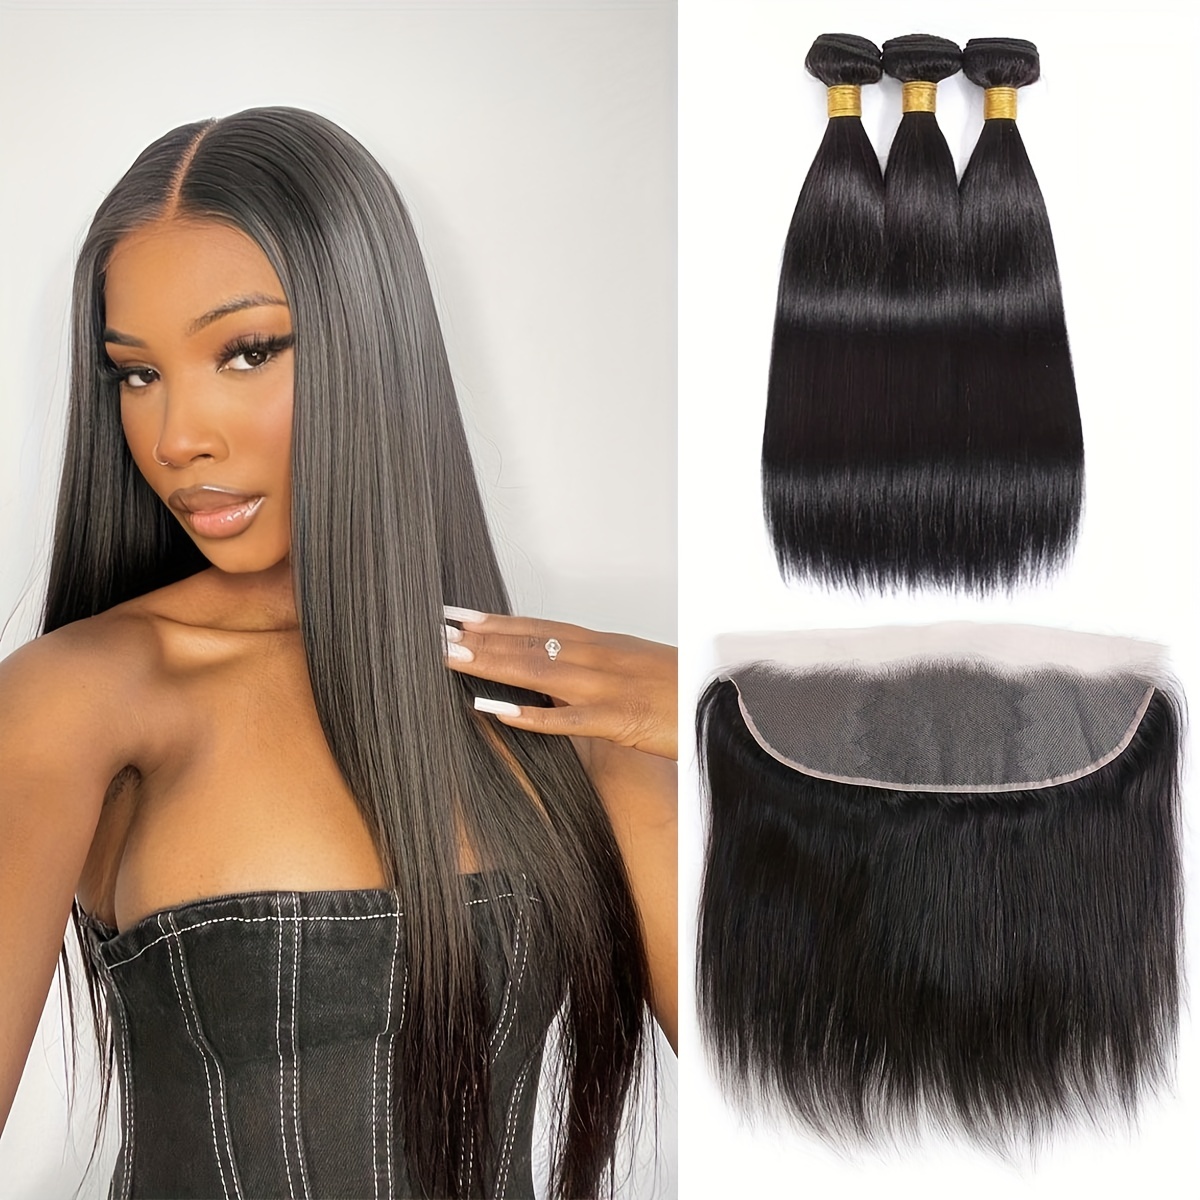 The Bundle Natural Straight w/13X4 Frontal Lace Closure